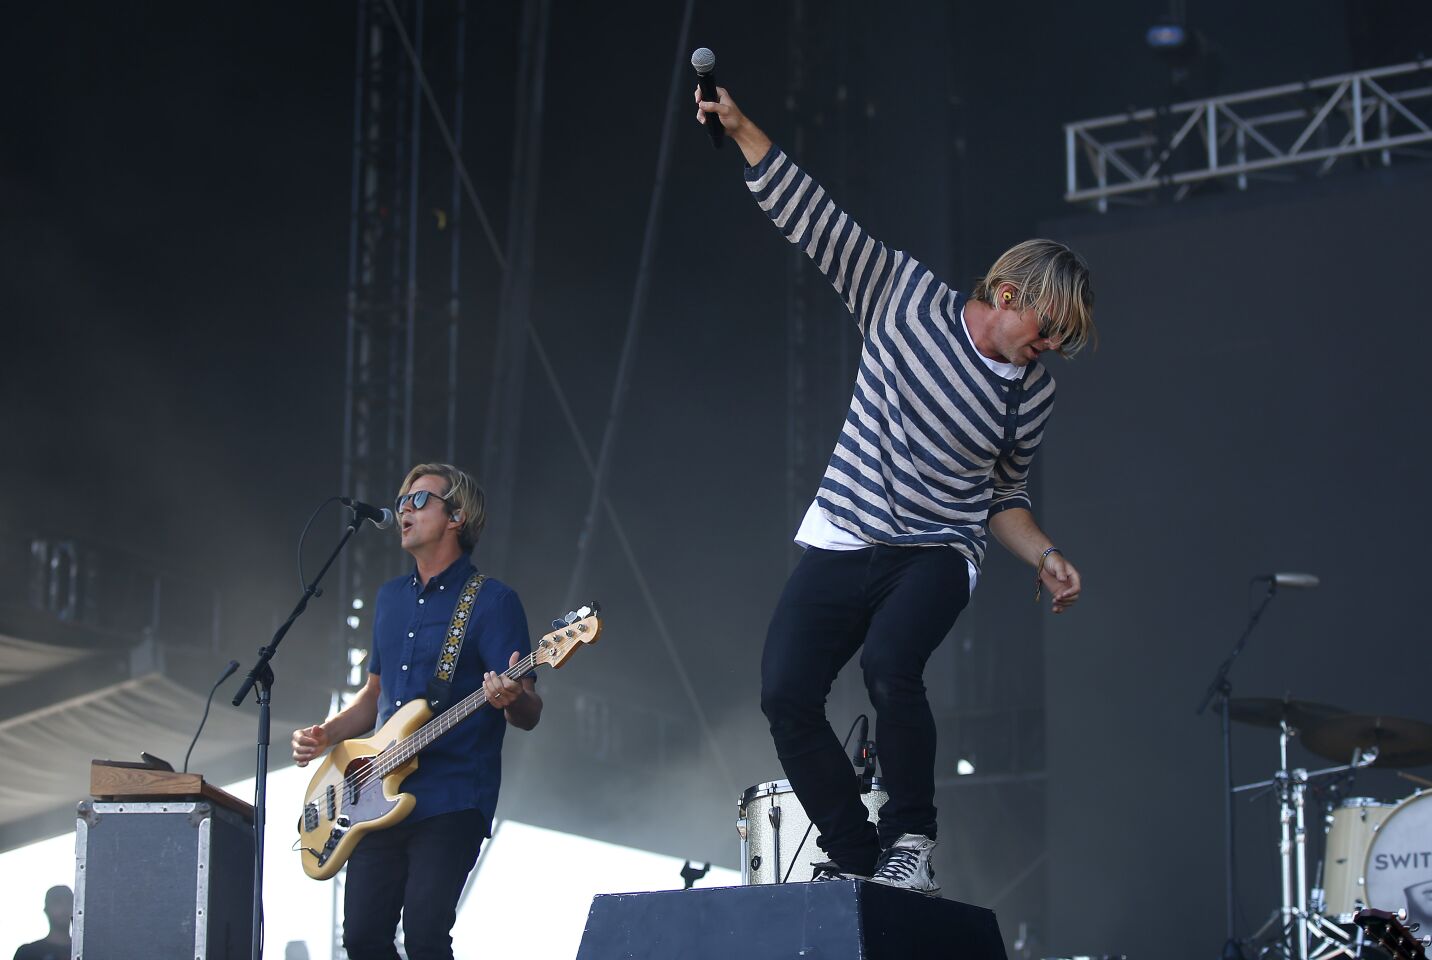 Tim Foreman and his brother Jon Foreman of the band Switchfoot perform at the Sunset Cliffs stage at KAABOO Del Mar on Saturday, Sept. 14, 2019.